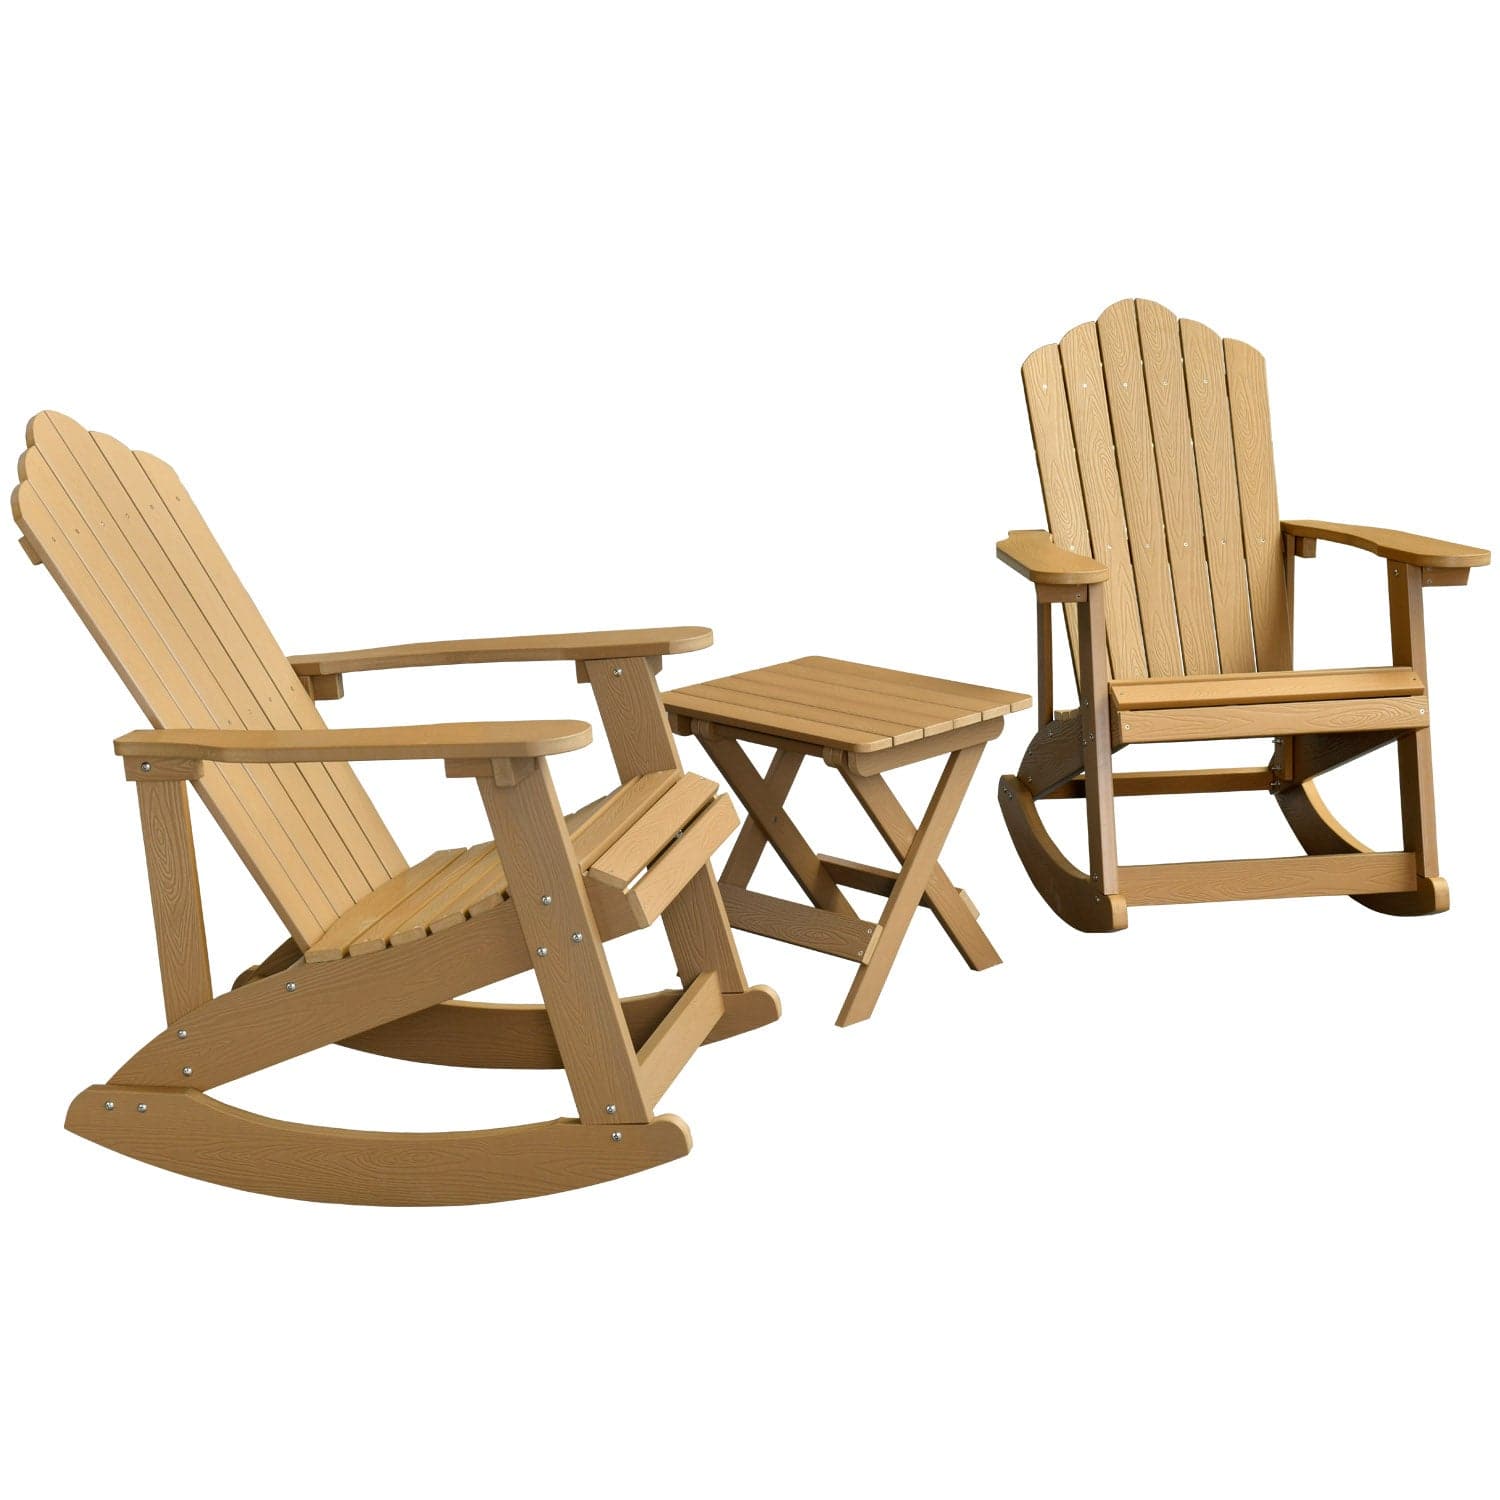 Ovios Patio Table and Chairs 3-Piece with Adirondack Chair and Folded Table